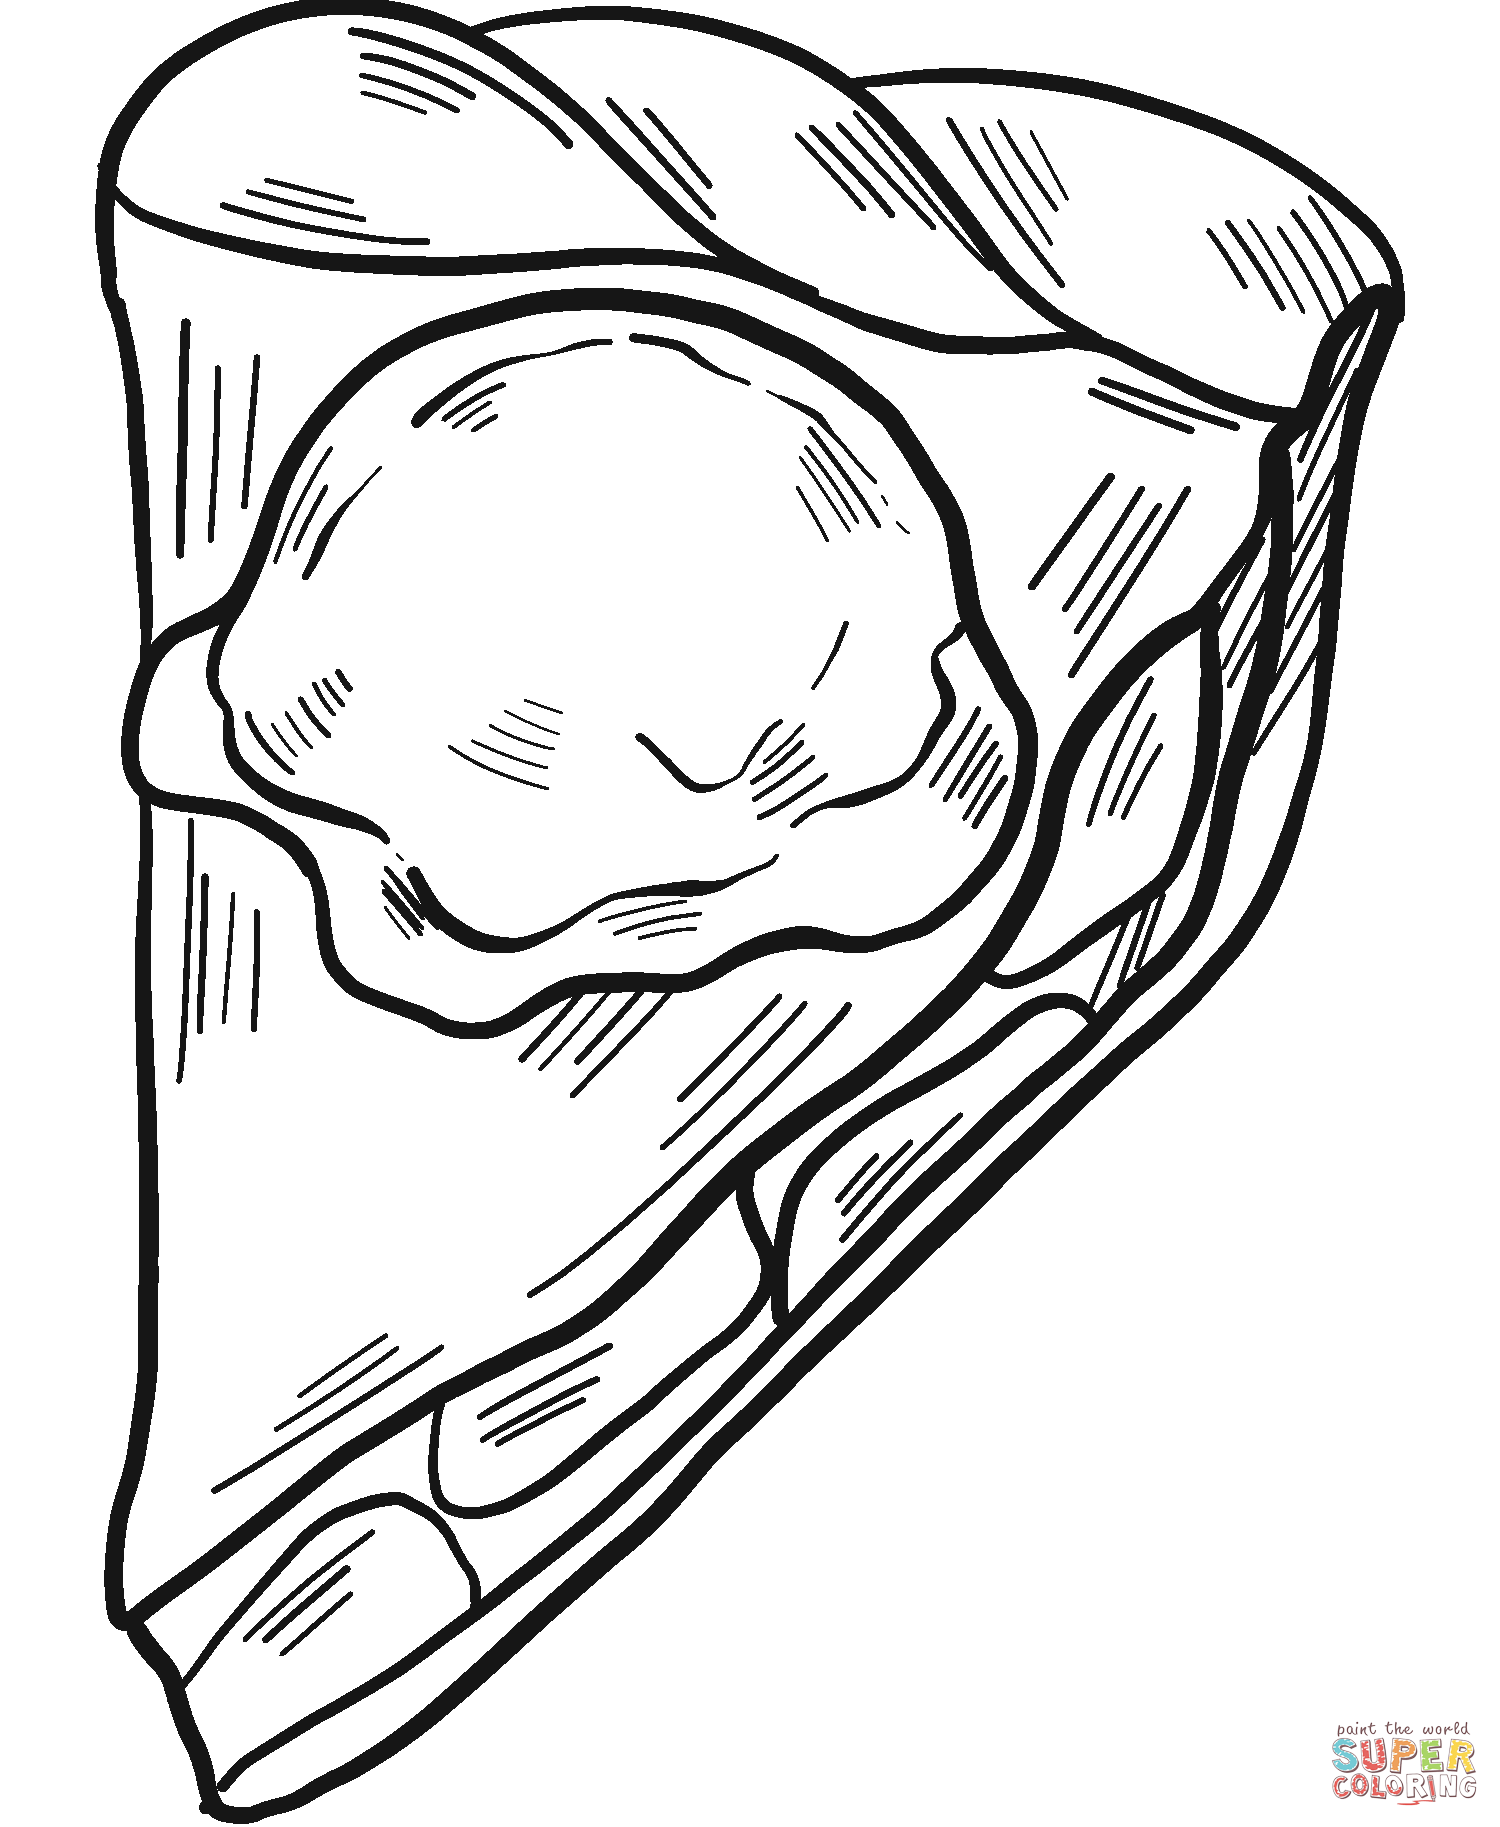 Apple pie slice coloring page free printable coloring pages